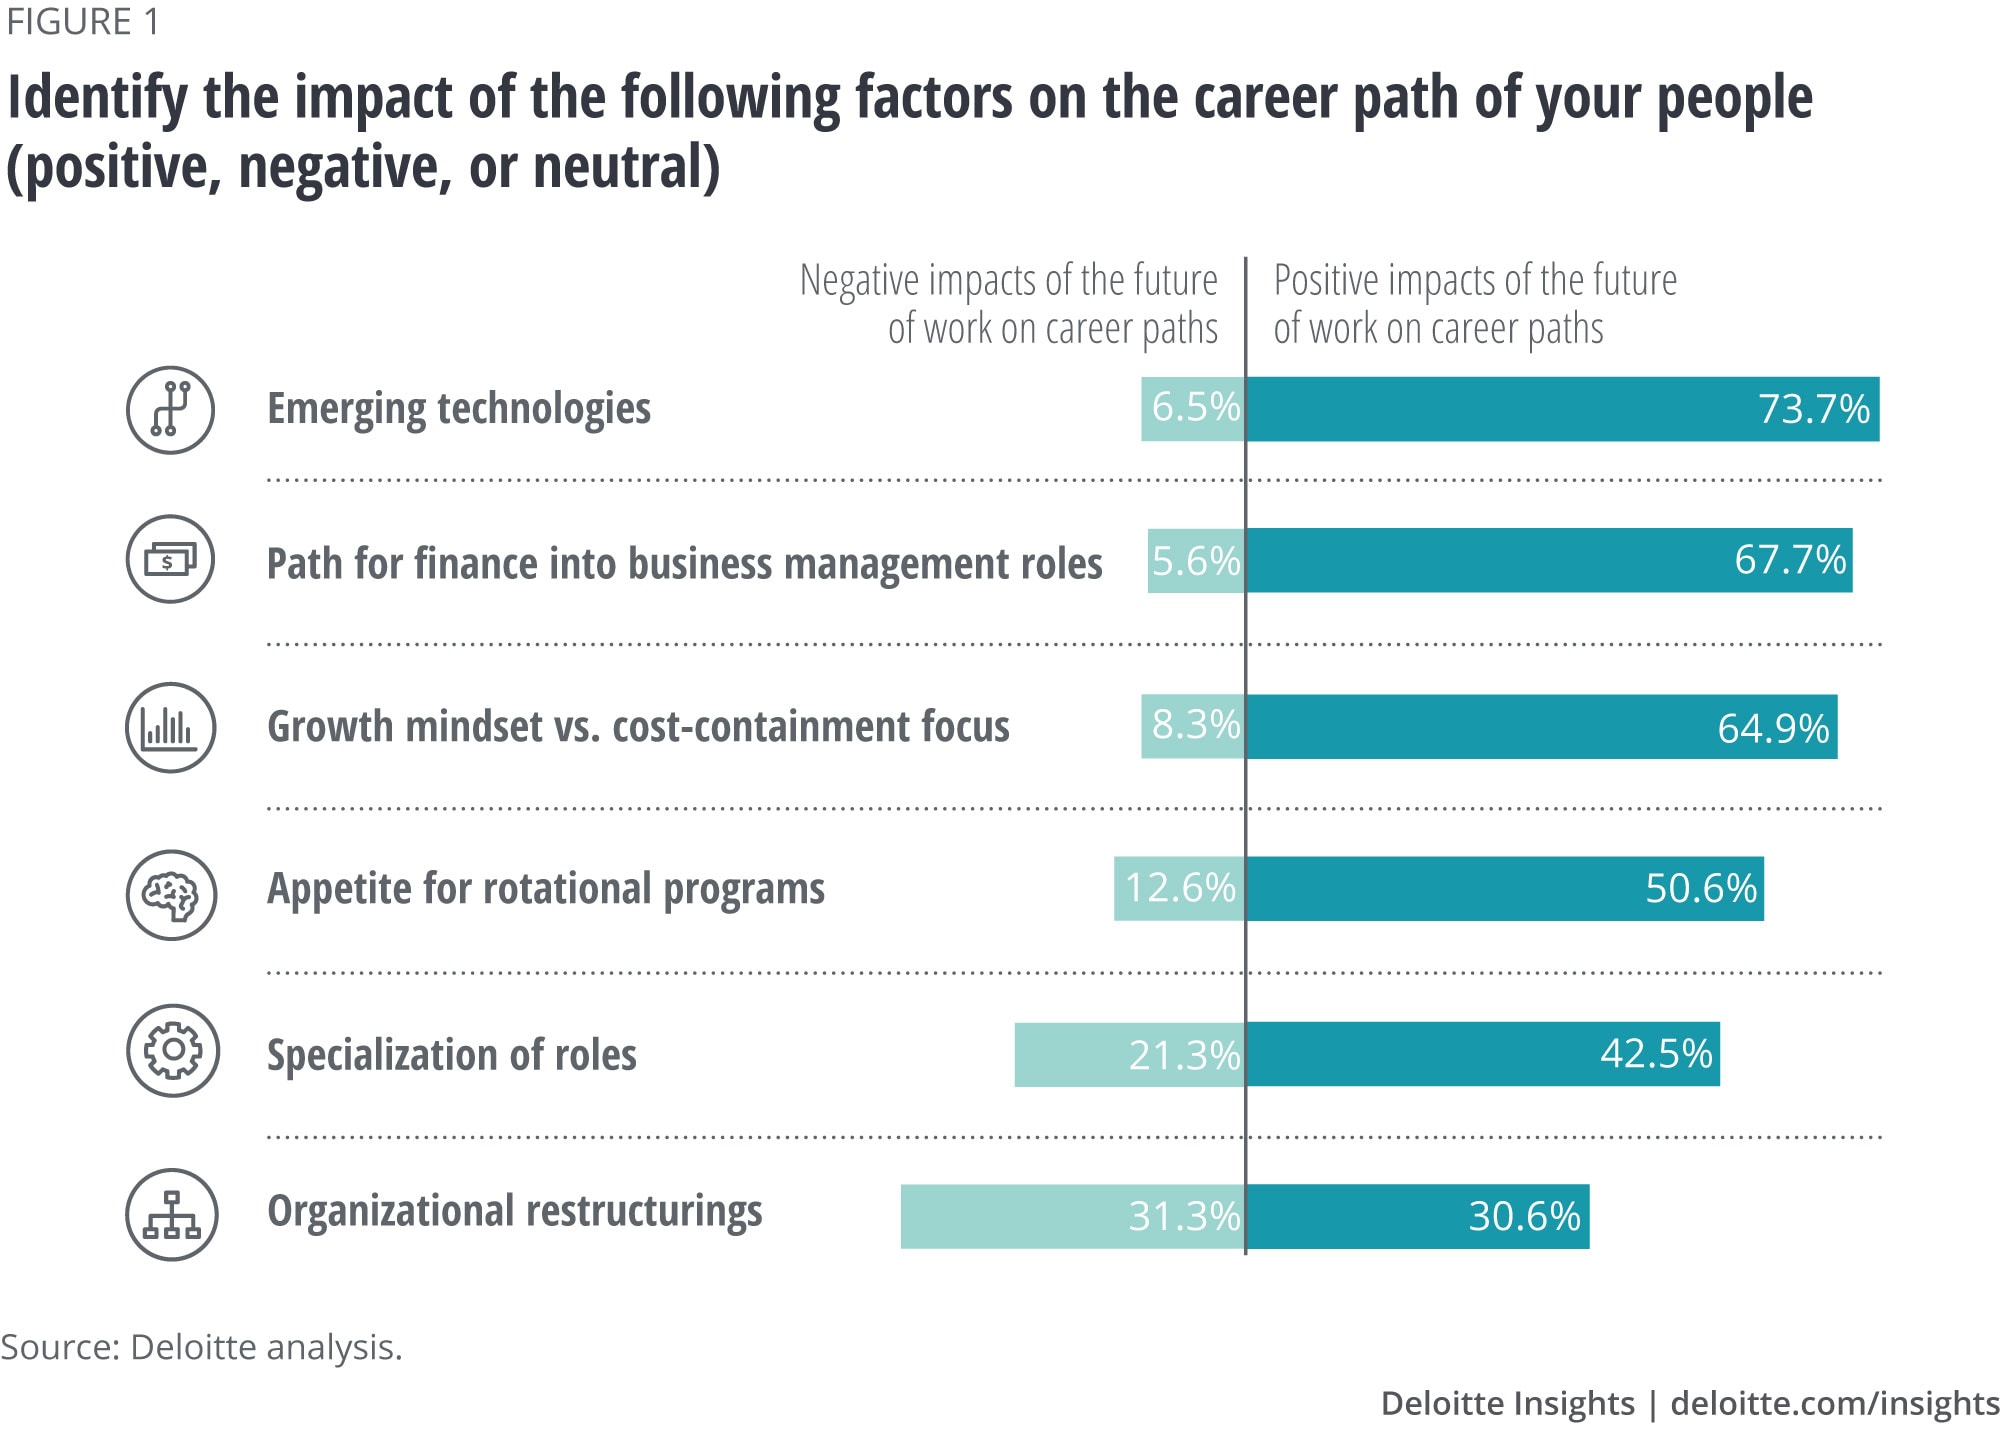 Identify the impact of the following factors on the career path of your people (positive, negative, or neutral)